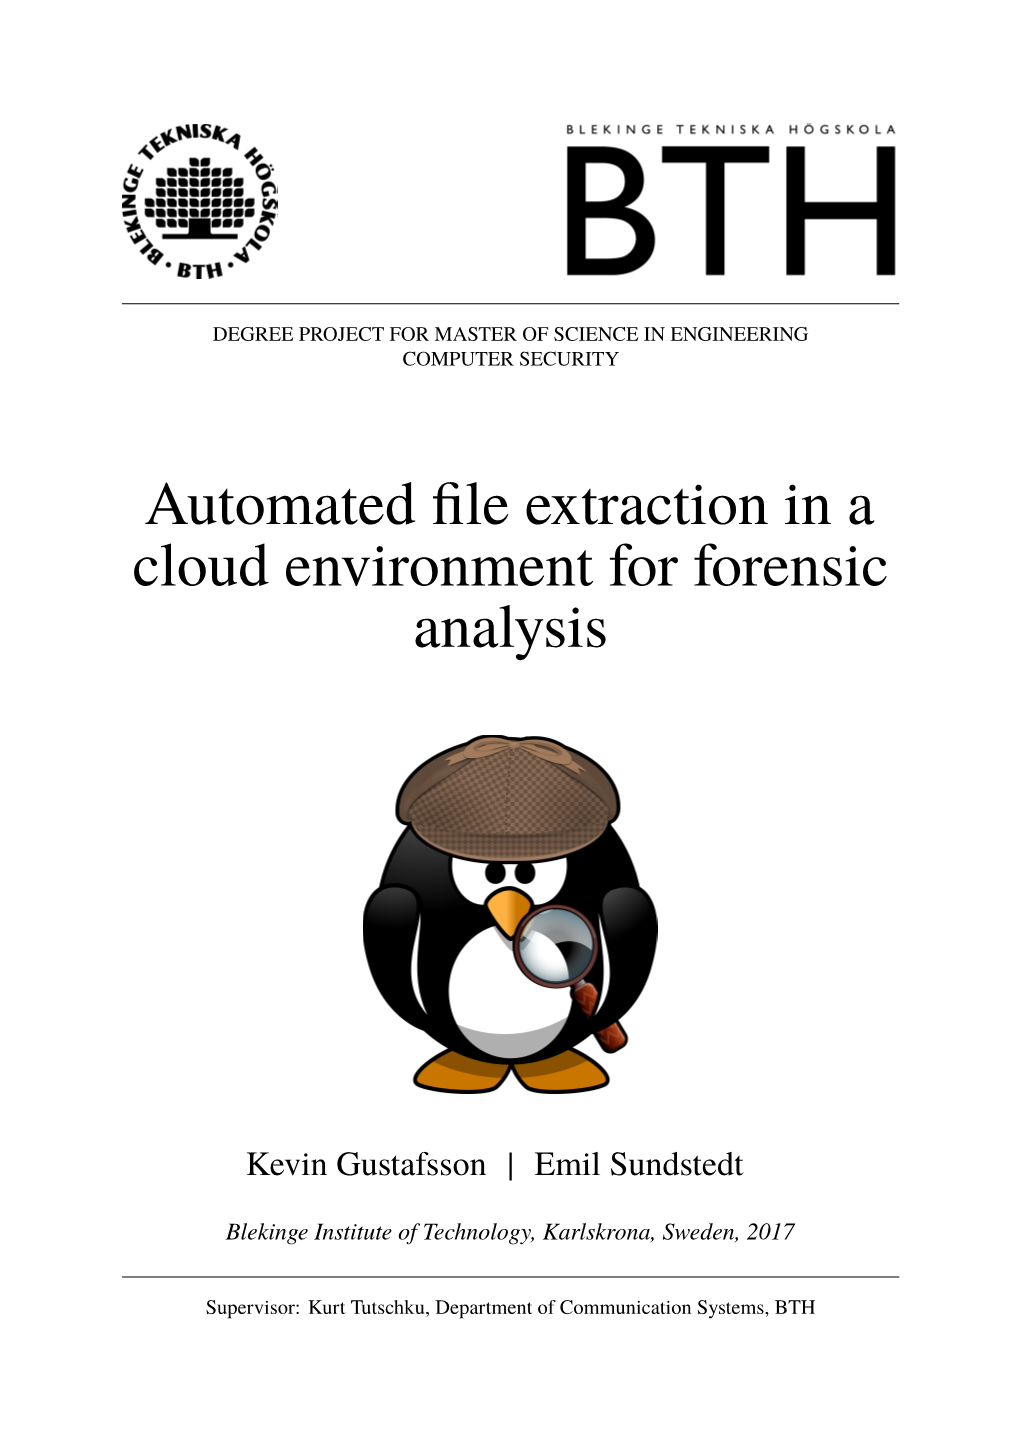 Automated File Extraction in a Cloud Environment for Forensic Analysis